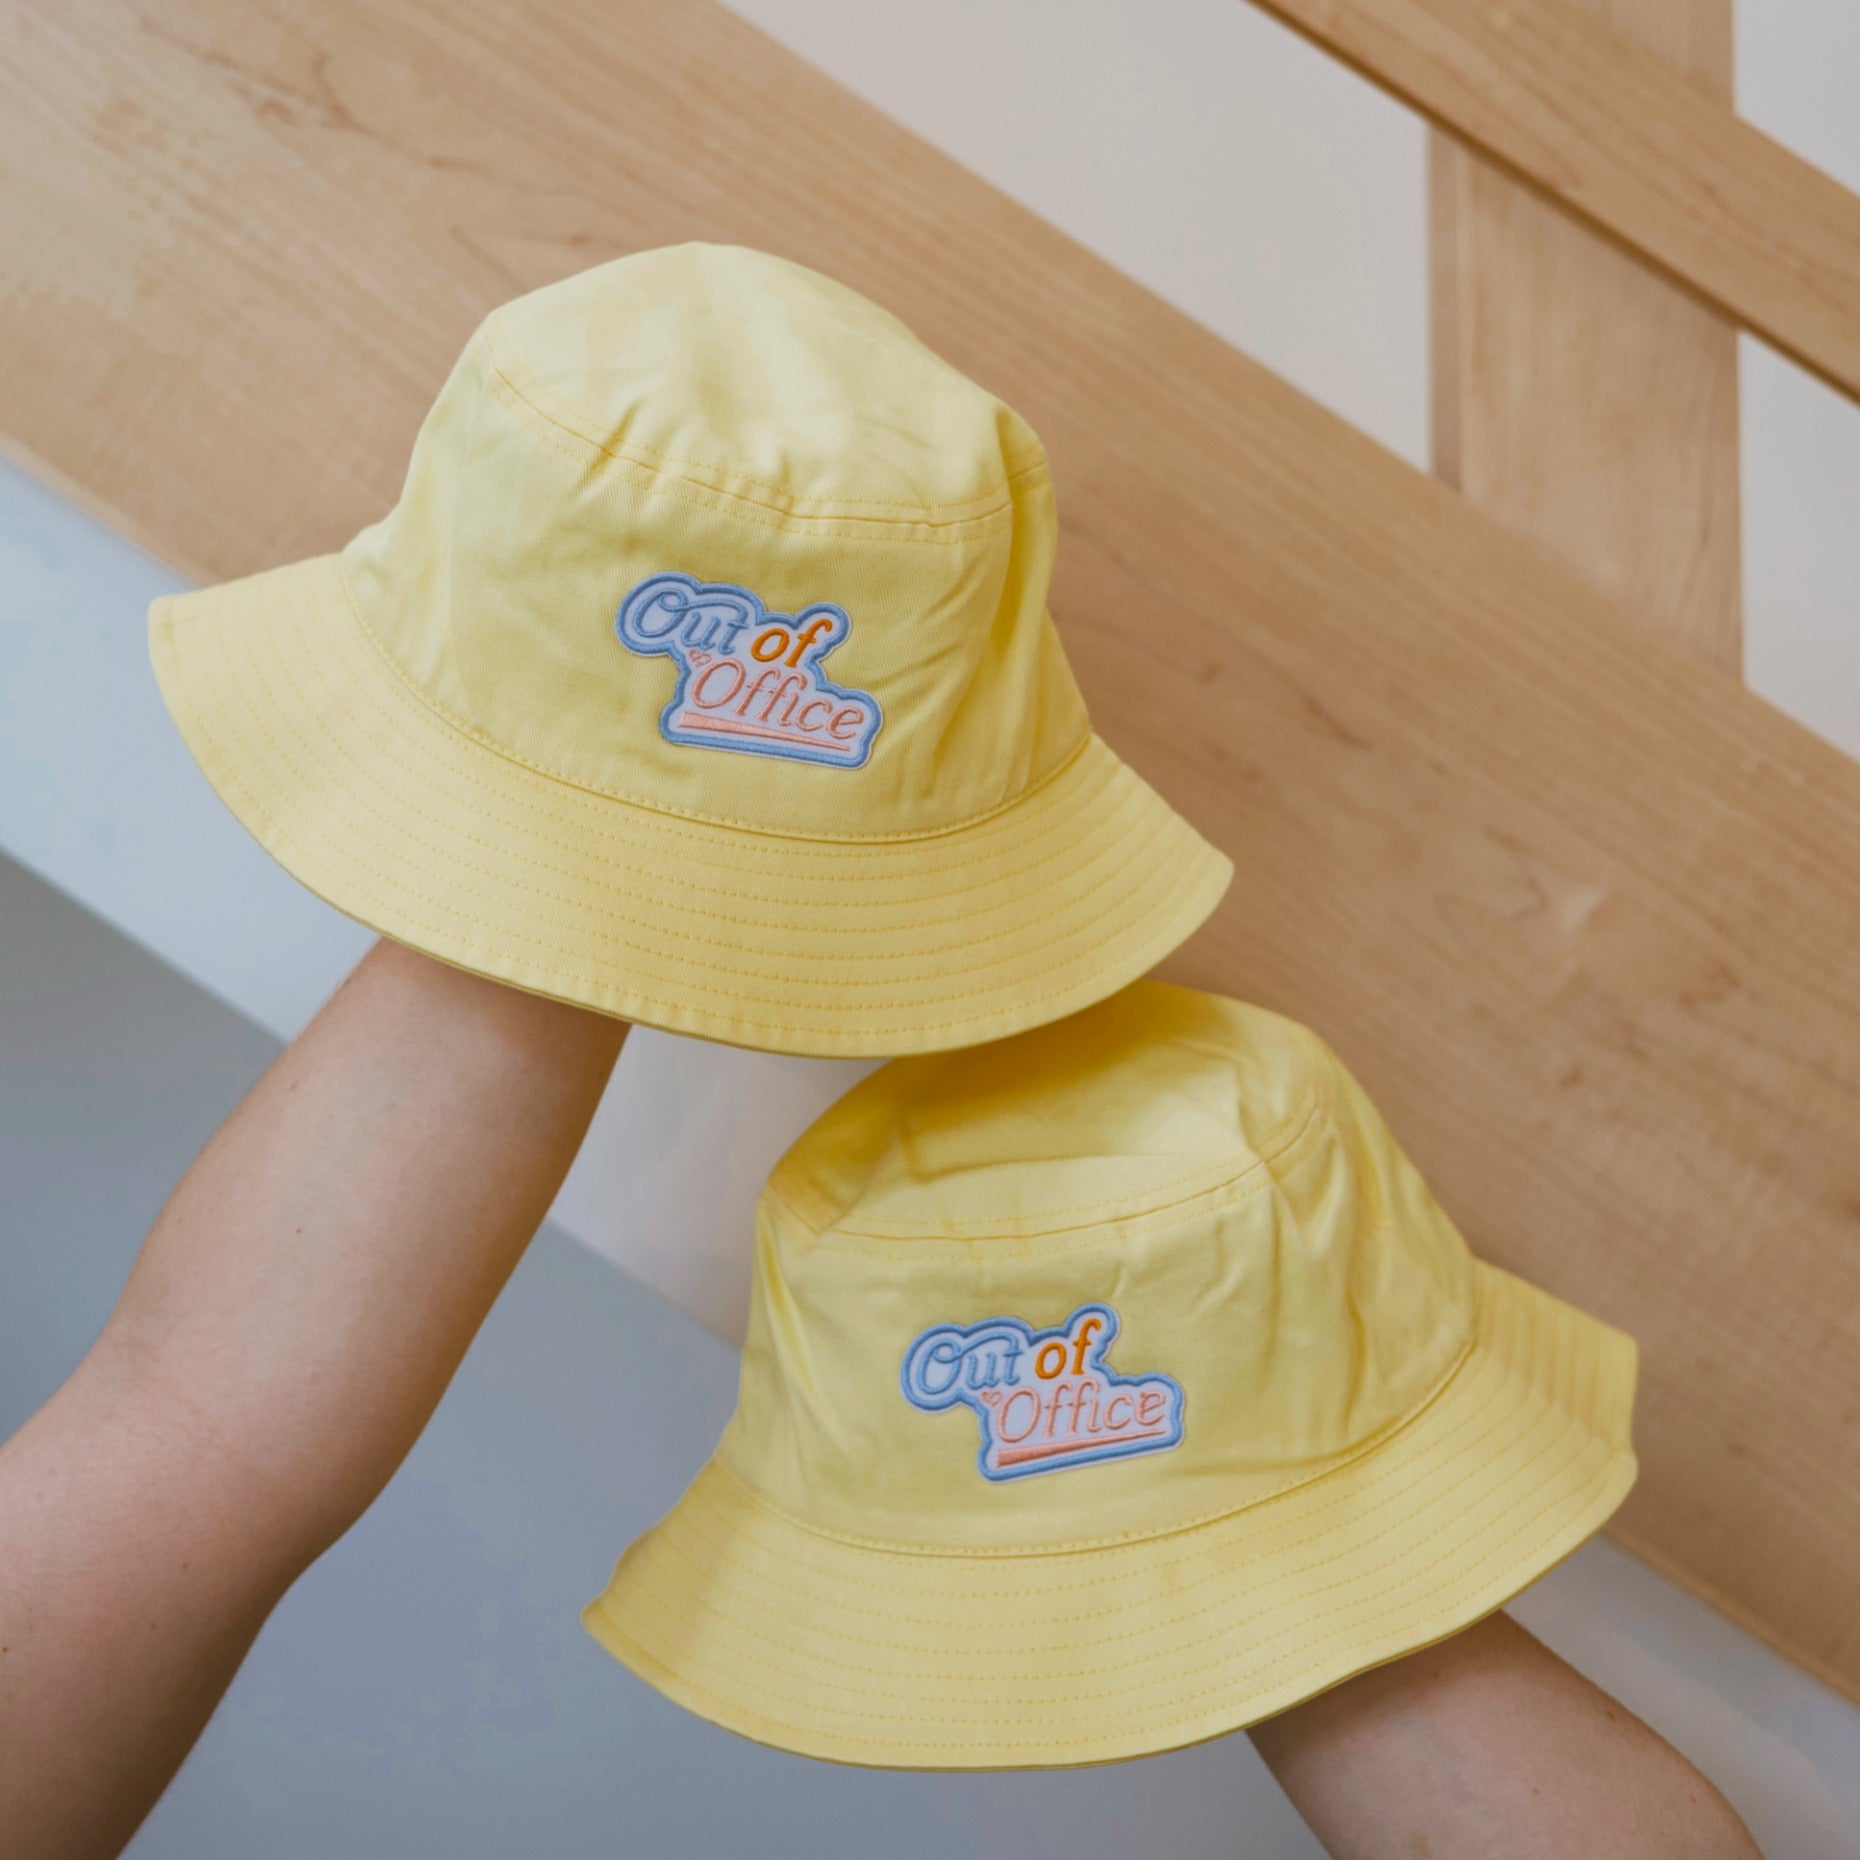 Out of Office Bucket Hat